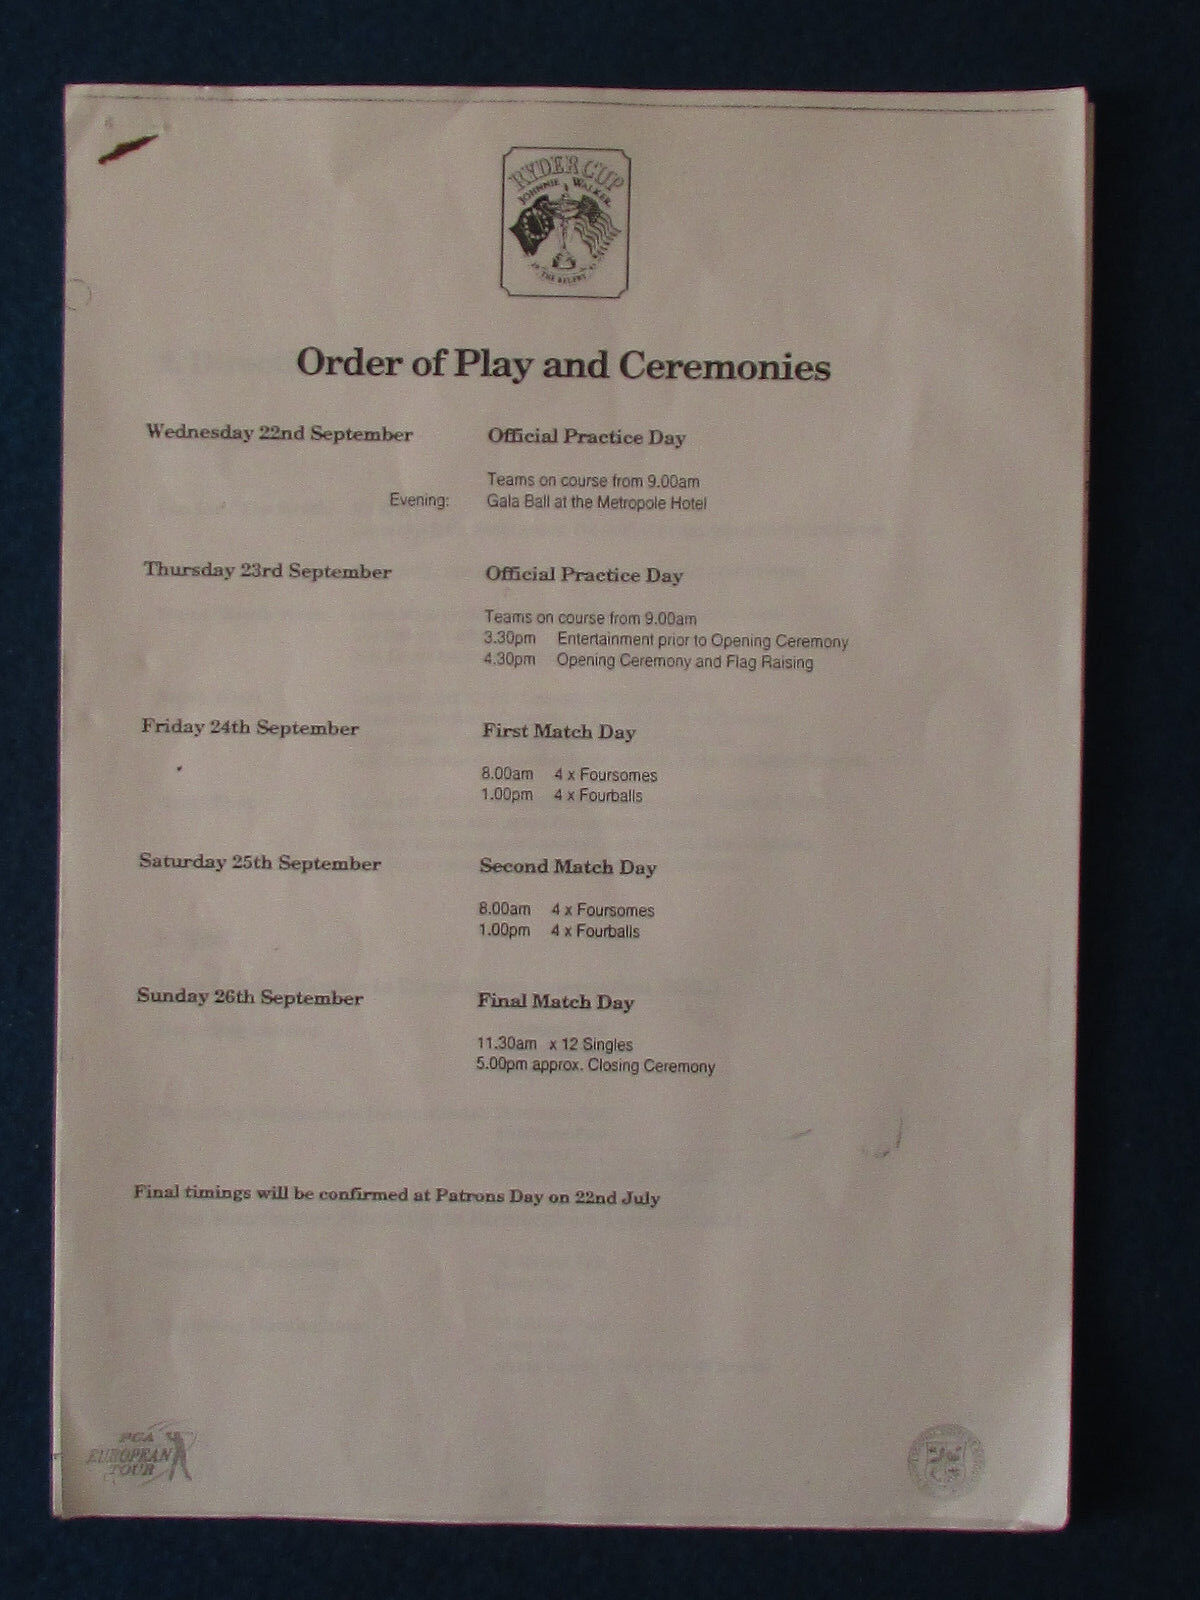 Ryder Cup 1993 - The Belfry - Order of Play and Ceremonies Paperwork